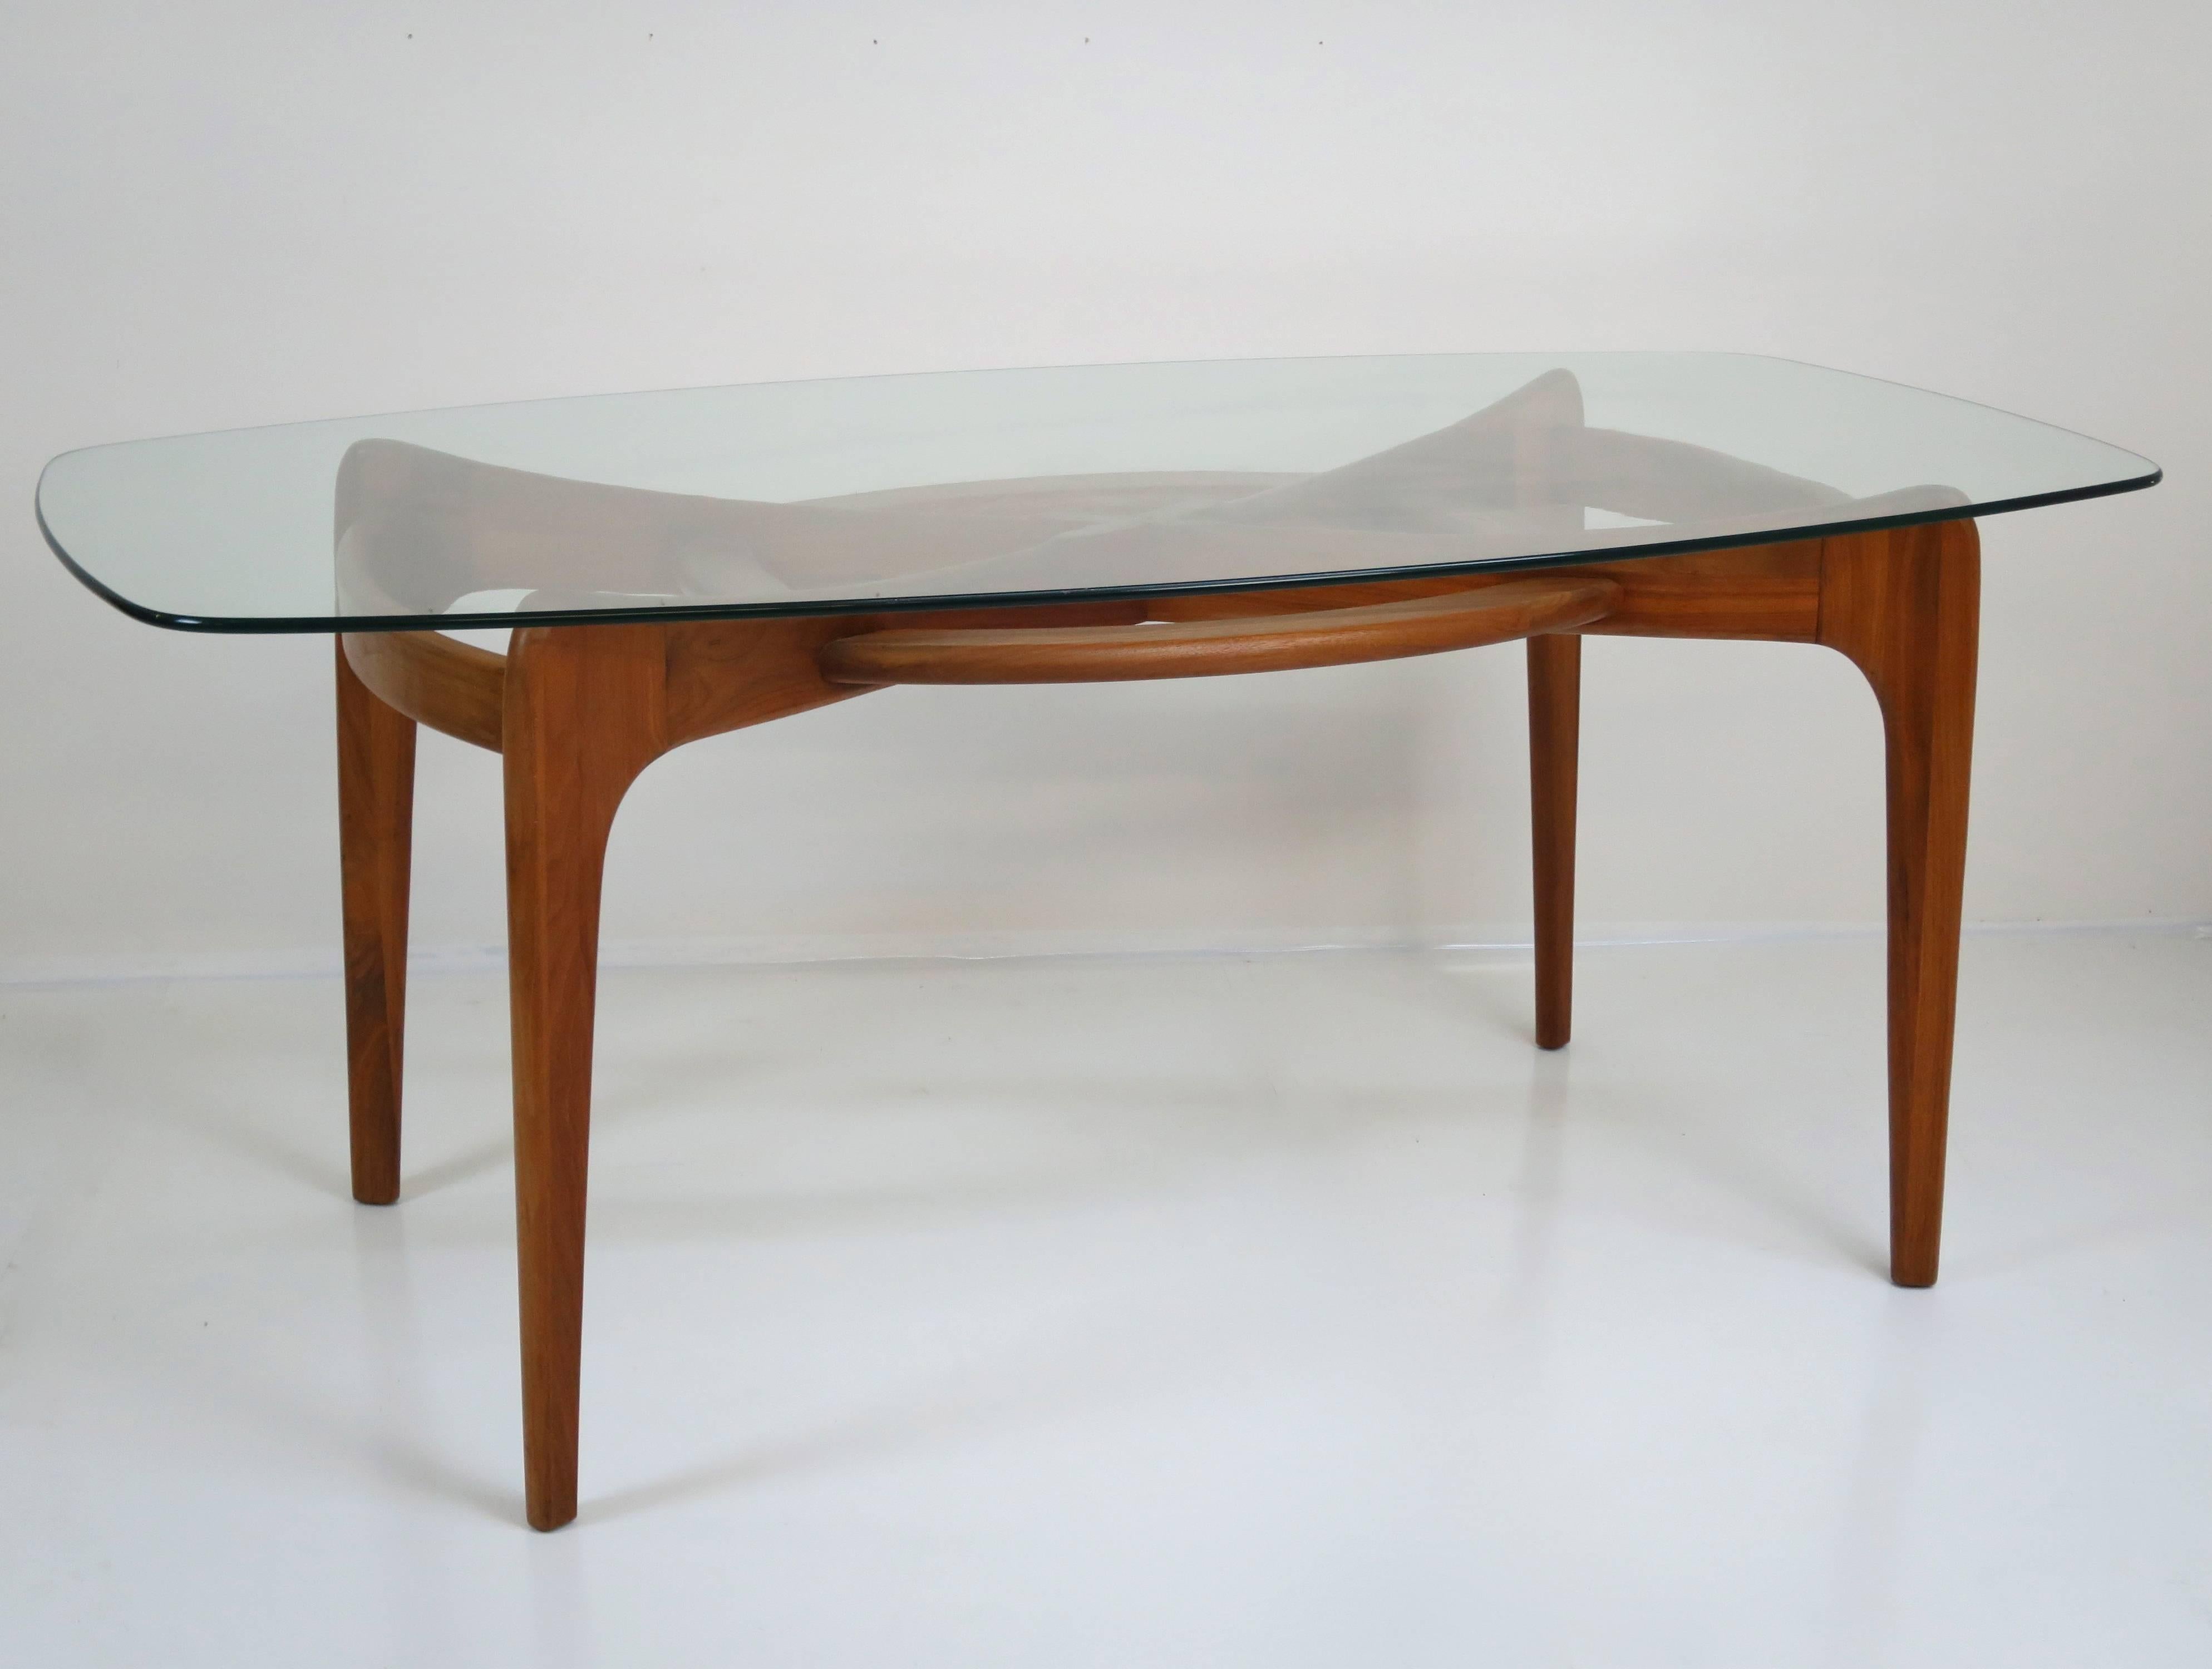 Sculptural walnut dining table by Adrain Pearsall for Craft Associates, circa 1950s.